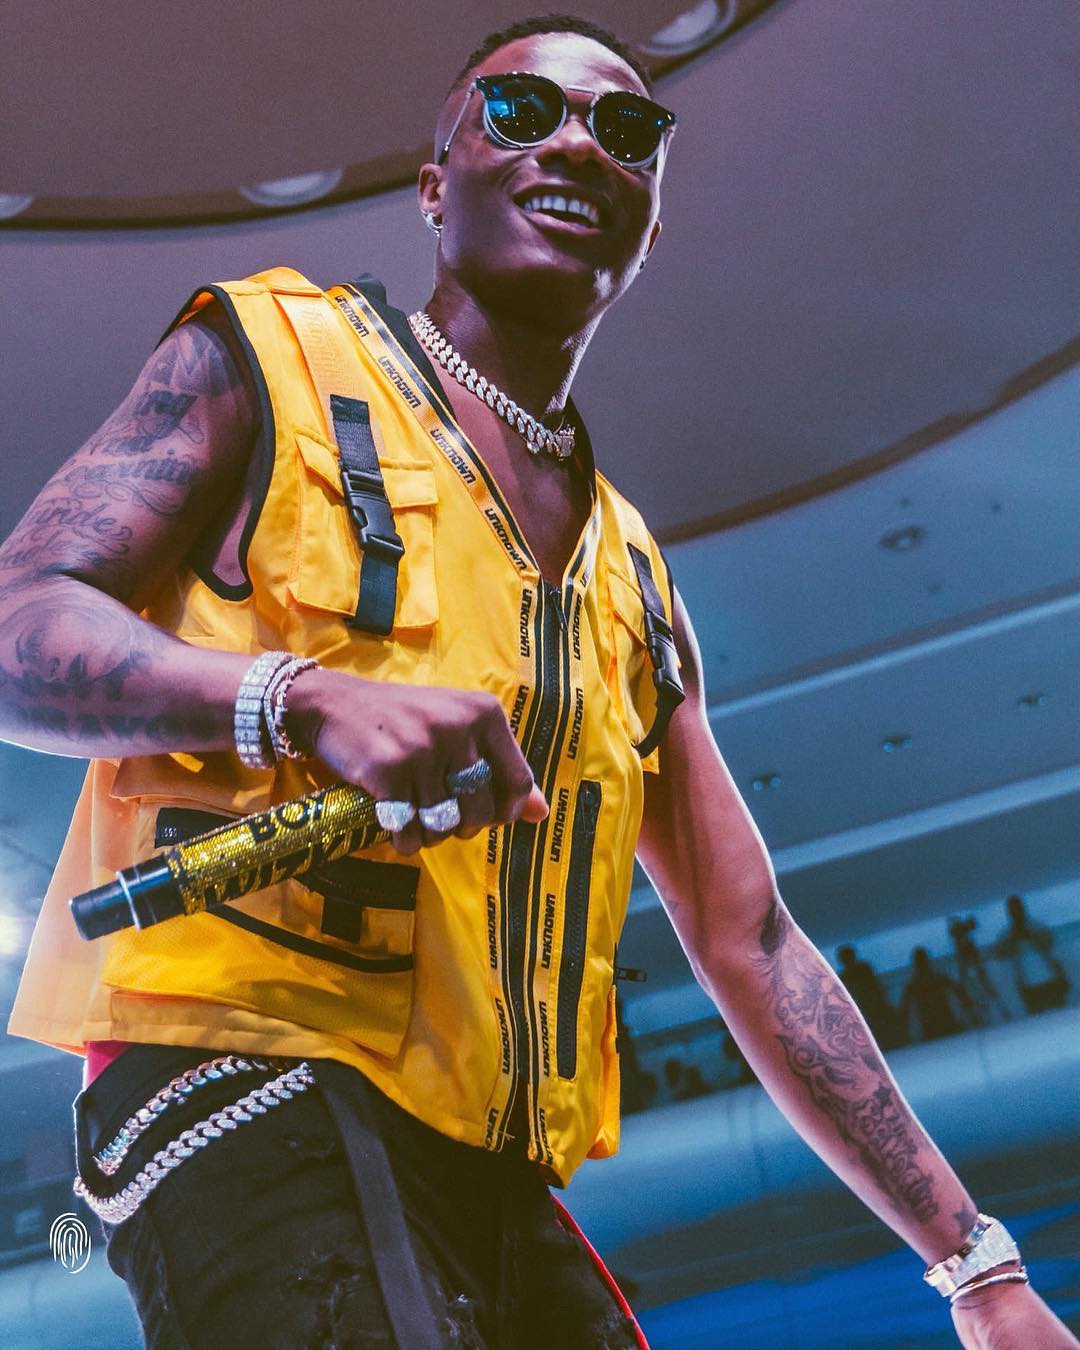 'If I sleep with your girl, you won't get her back' - Wizkid says, Nigerians react.